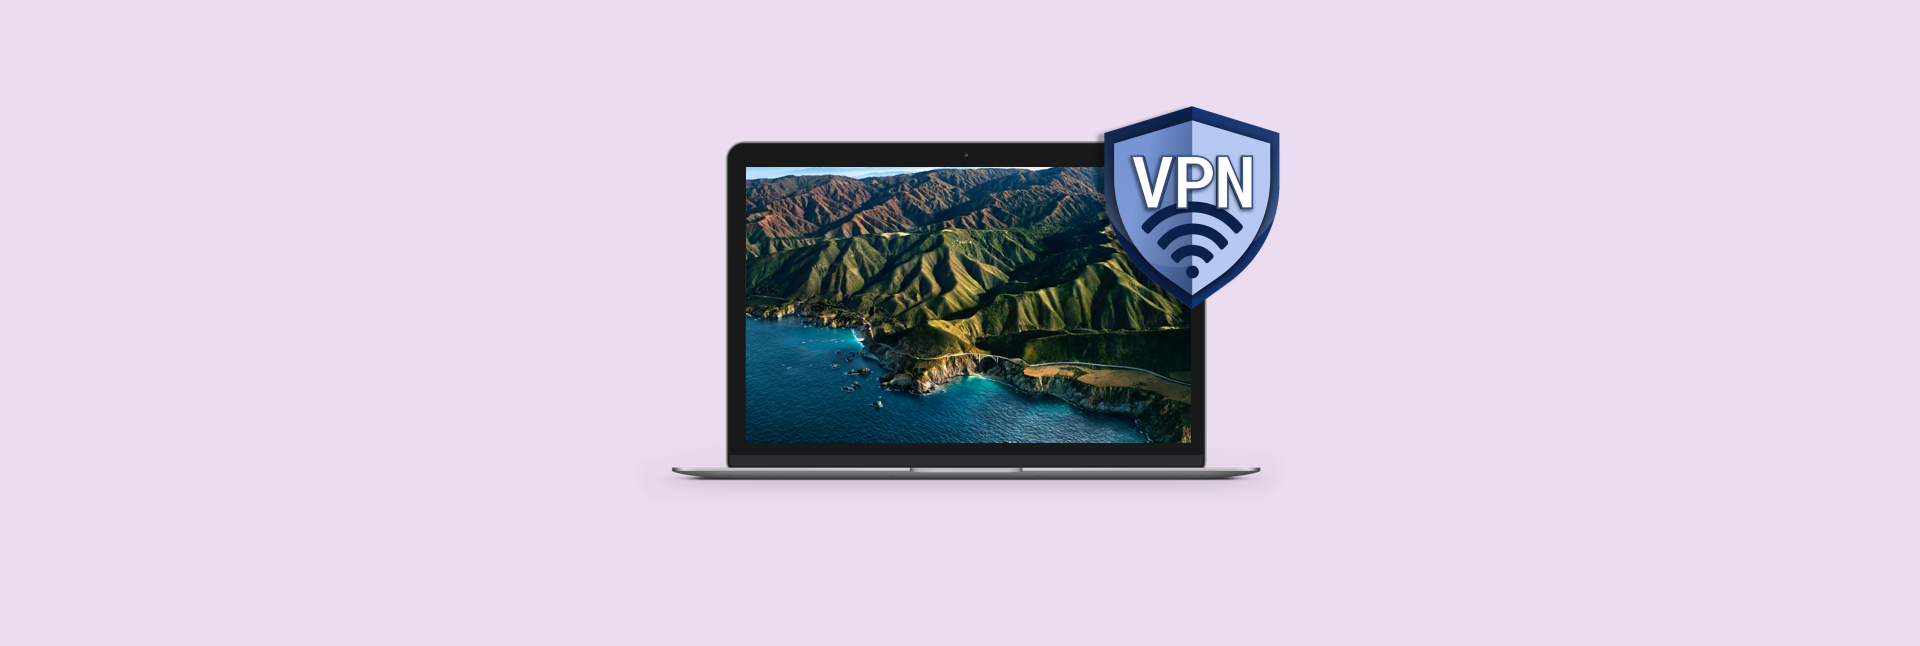 best vpn for mac products